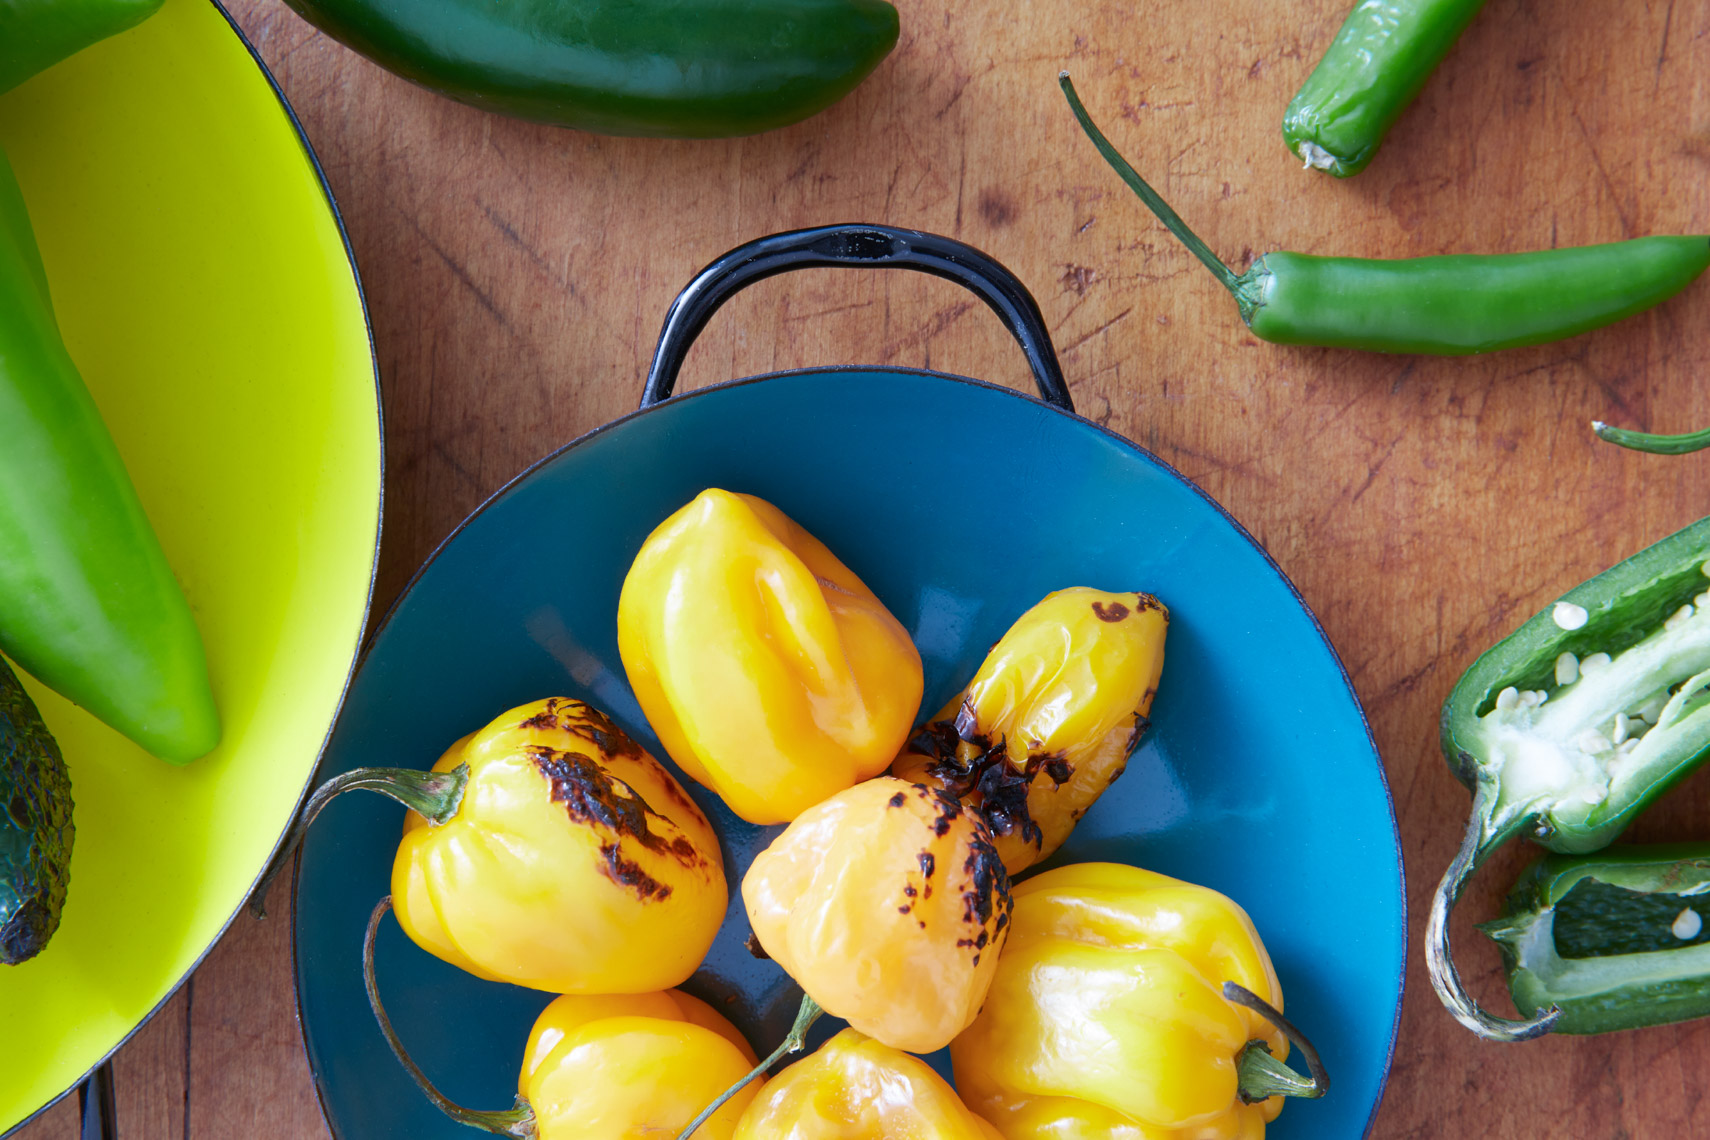 grilled yellow peppers in a blue bowl and green vegetables on wooden surface San Francisco food photographer